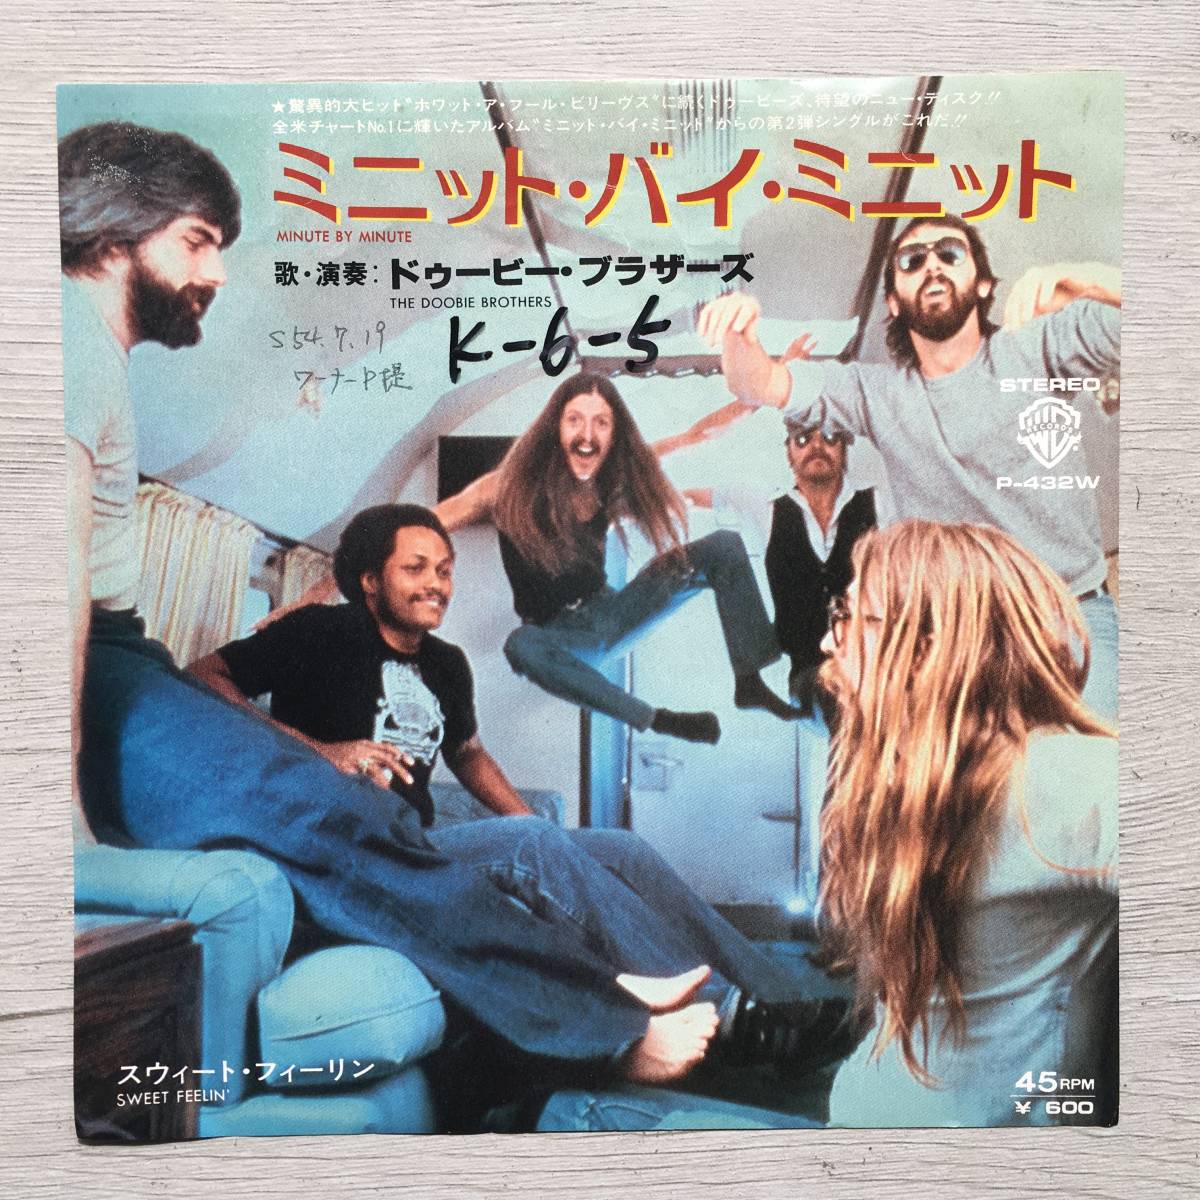 PROMO THE DOOBIE BROTHERS MINUTE BY MINUTE